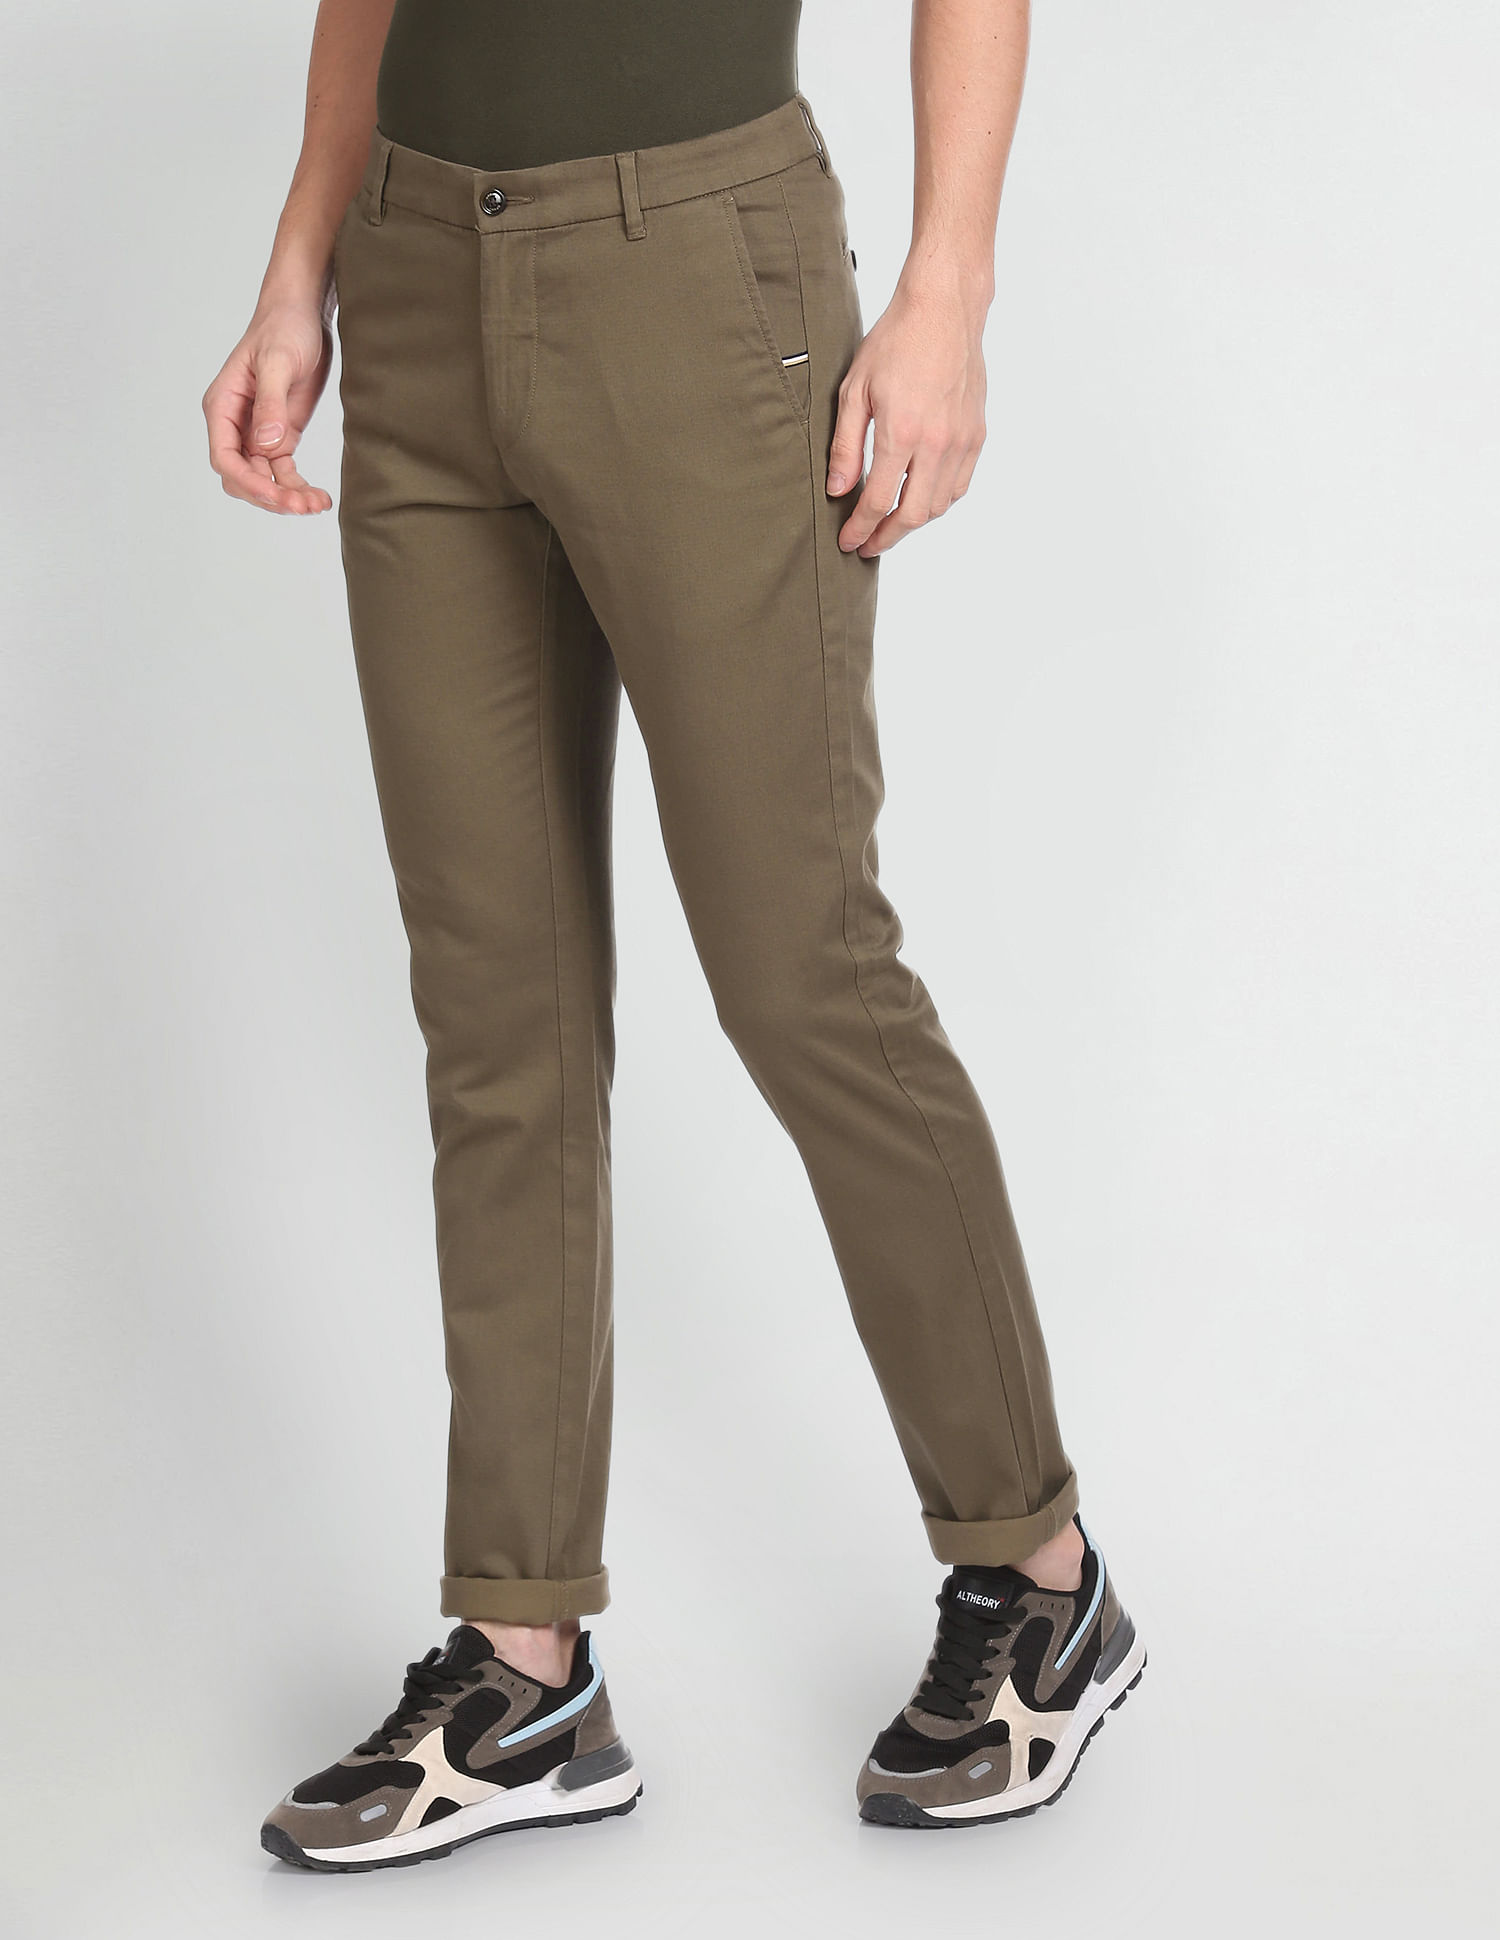 Cotton Stretch Brown Printed Flat Front Casual Trouser